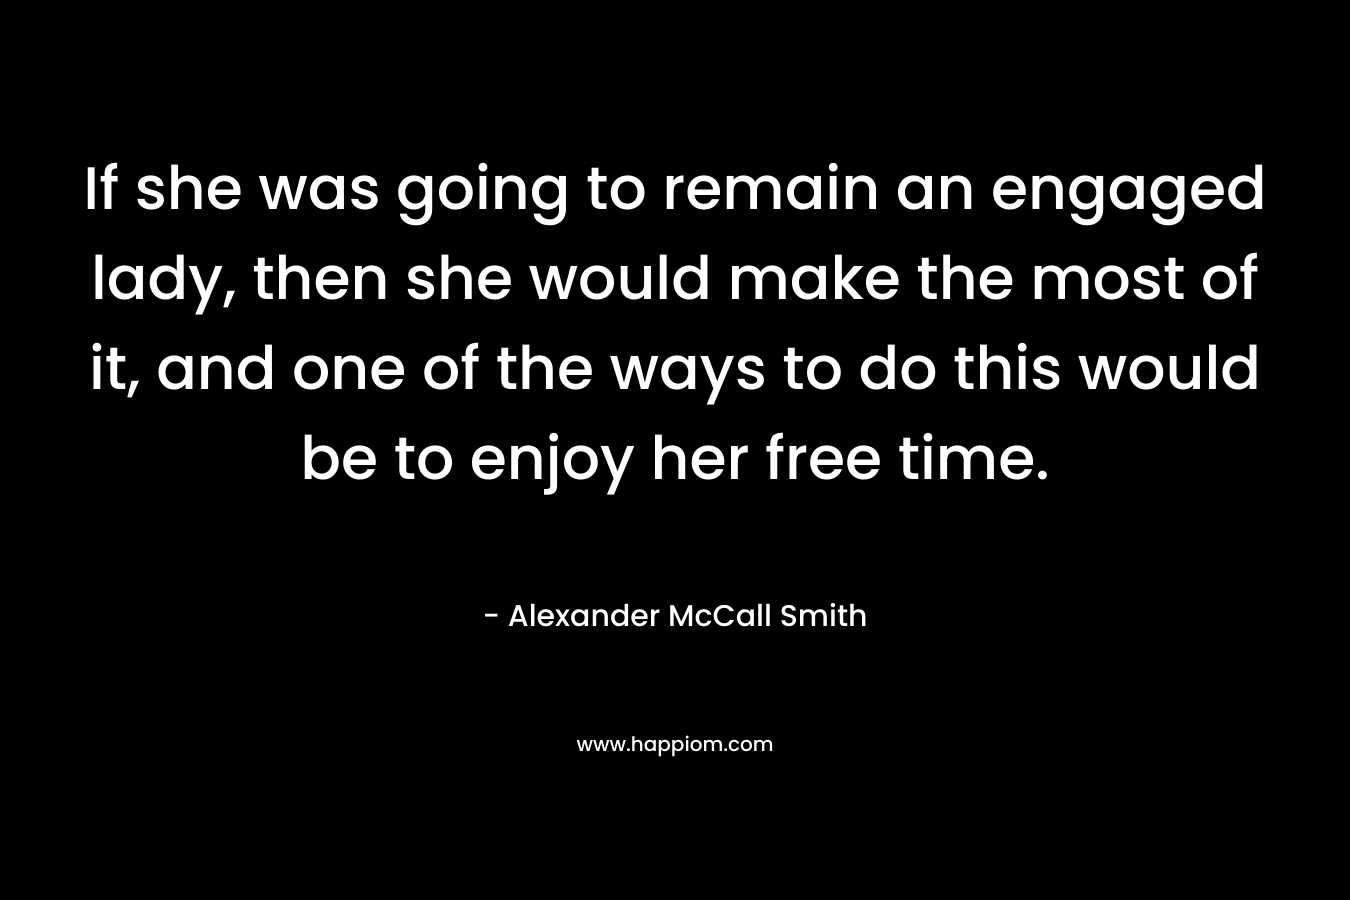 If she was going to remain an engaged lady, then she would make the most of it, and one of the ways to do this would be to enjoy her free time.